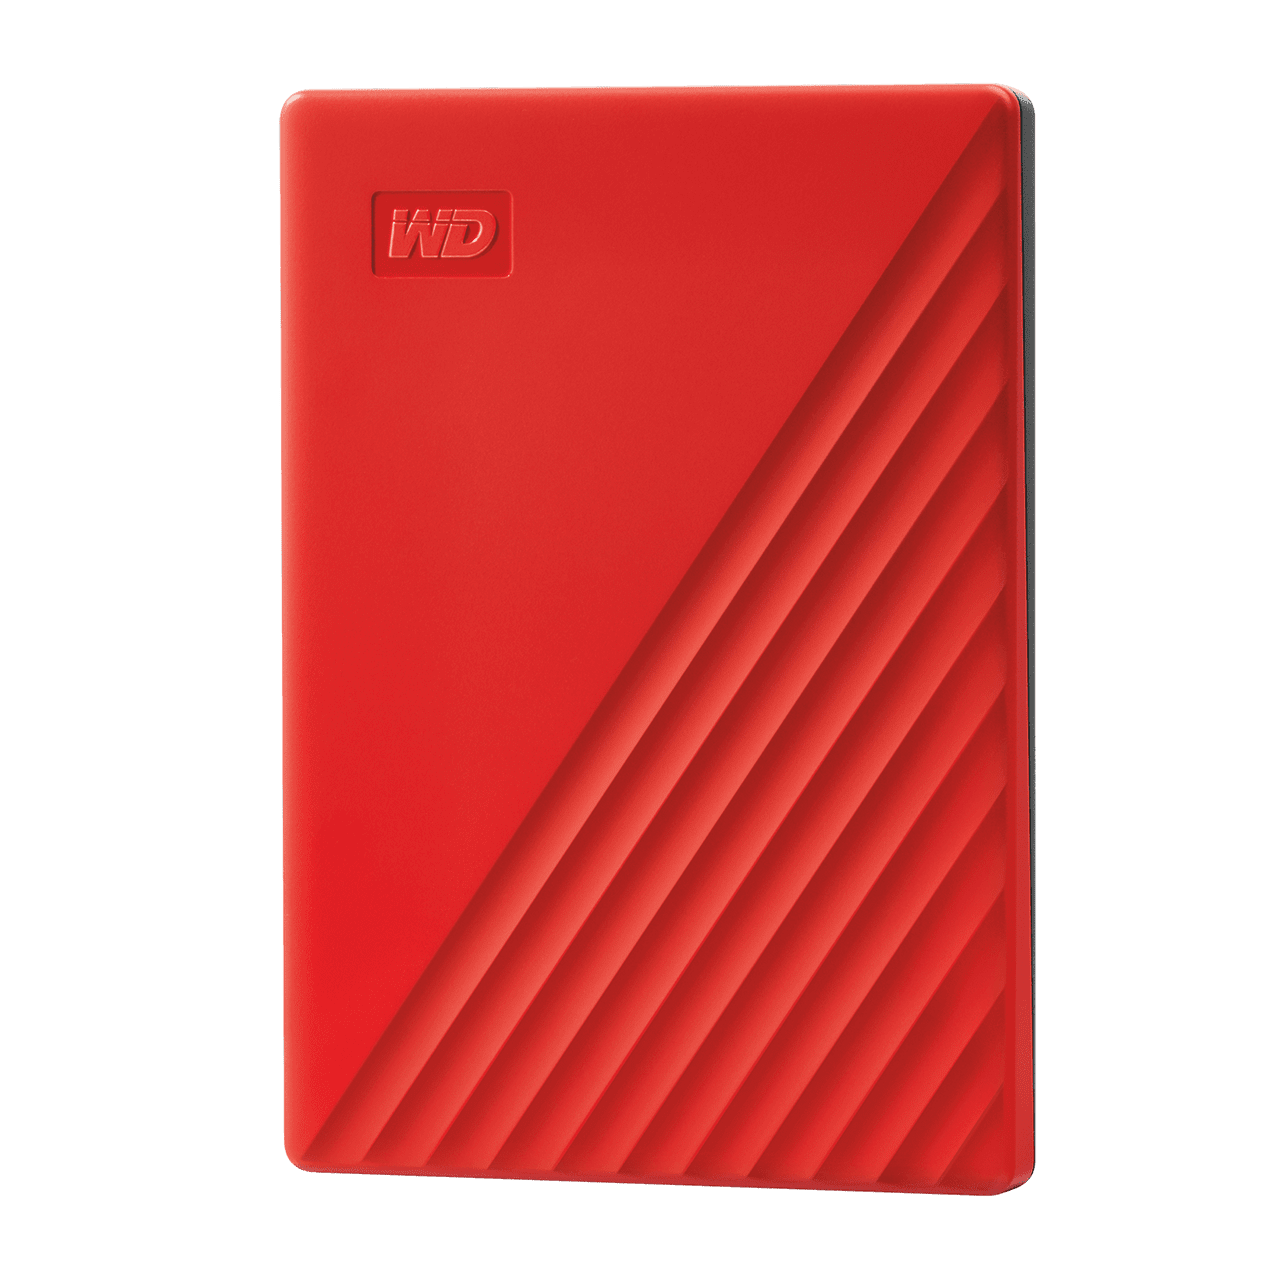 WD Western Digital My Passport 4TB (Red)  Slim Portable External Hard Disk USB 3.0 With WD Backup Software & Password Protection